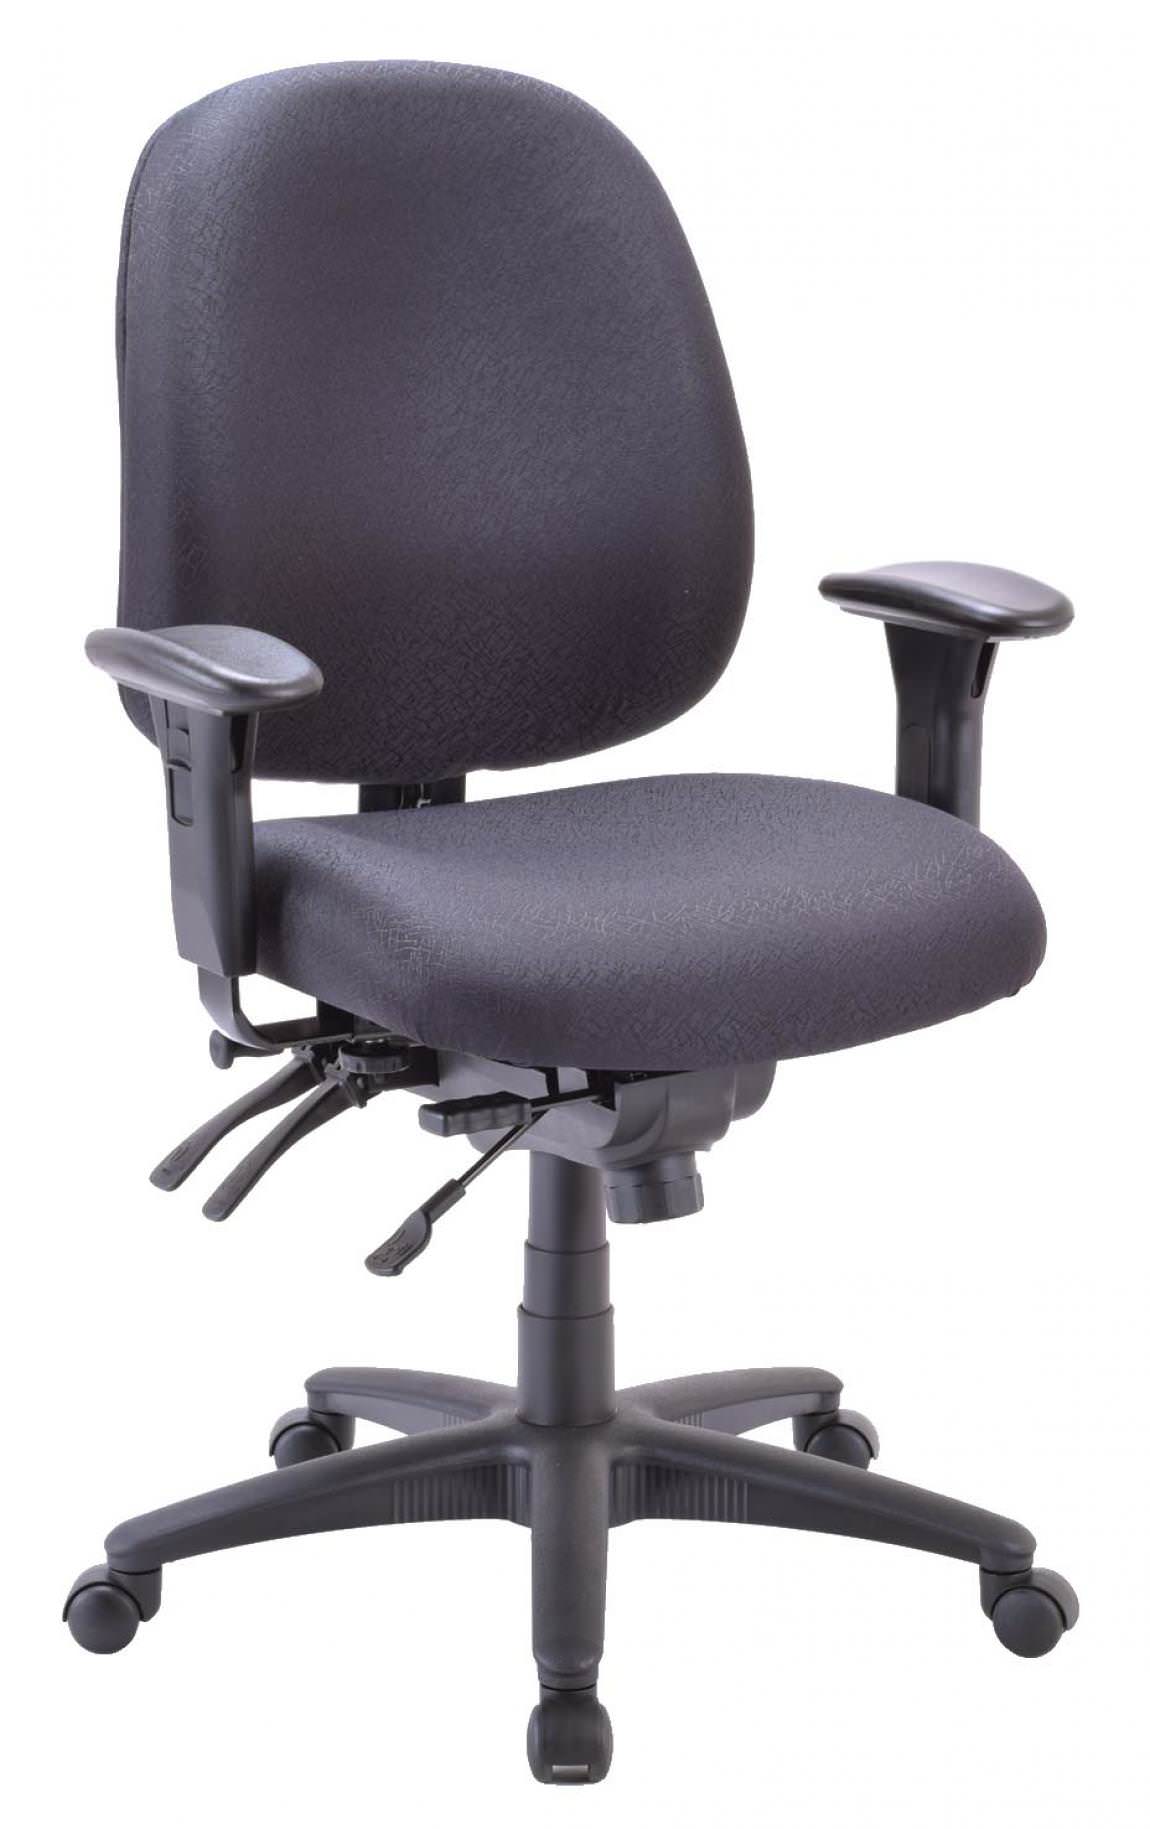 Value Plus Highly Adjustable Mid Back Chair with Arms and Seat Slider